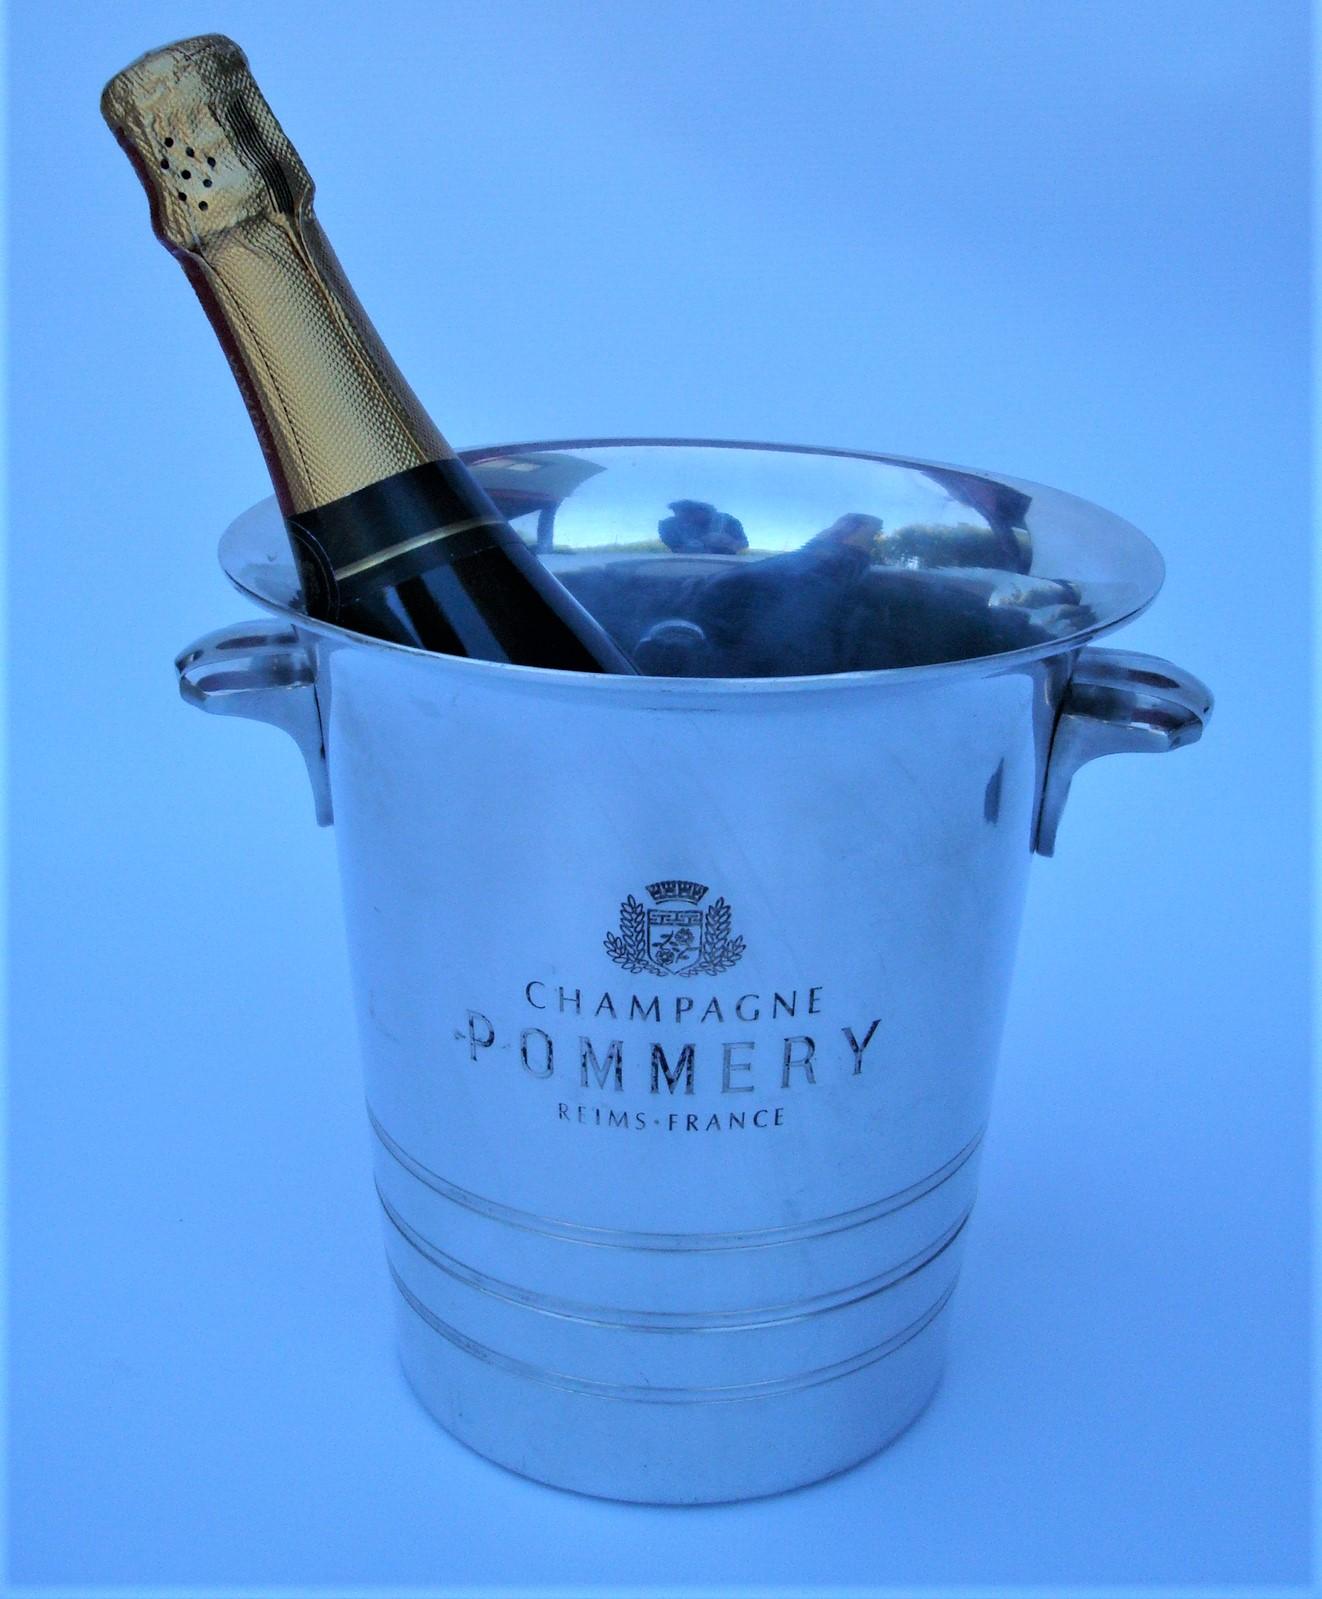 Polished Mid-Century Champagne Pommery Cooler / Bucket Made by Argit, Paris